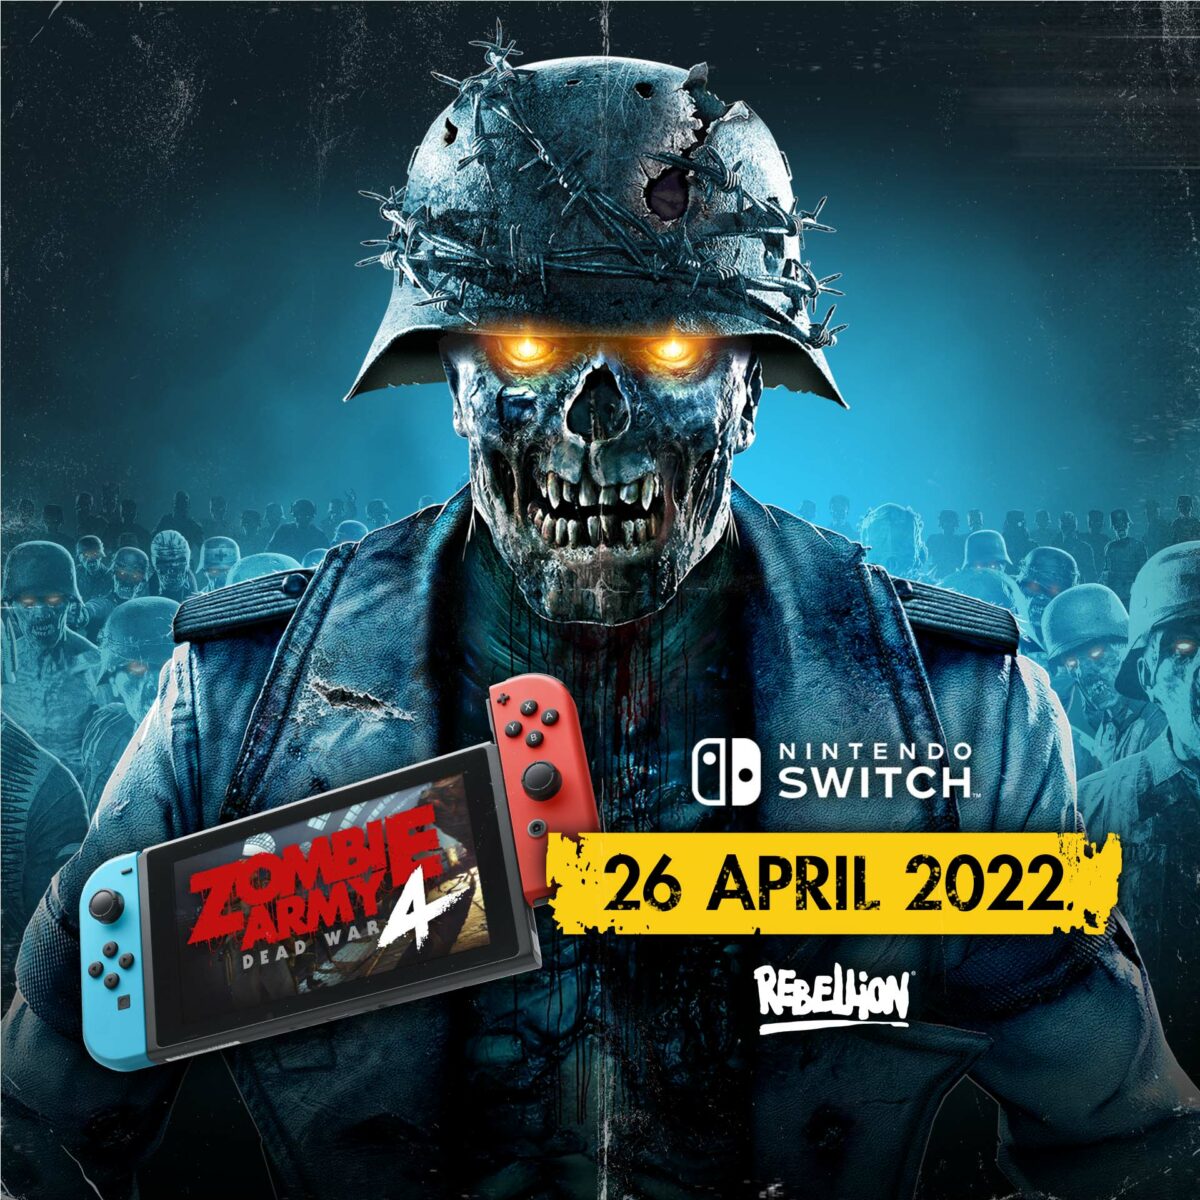 Zombie Army 4: Dead War is bringing the undead carnage to Nintendo Switch